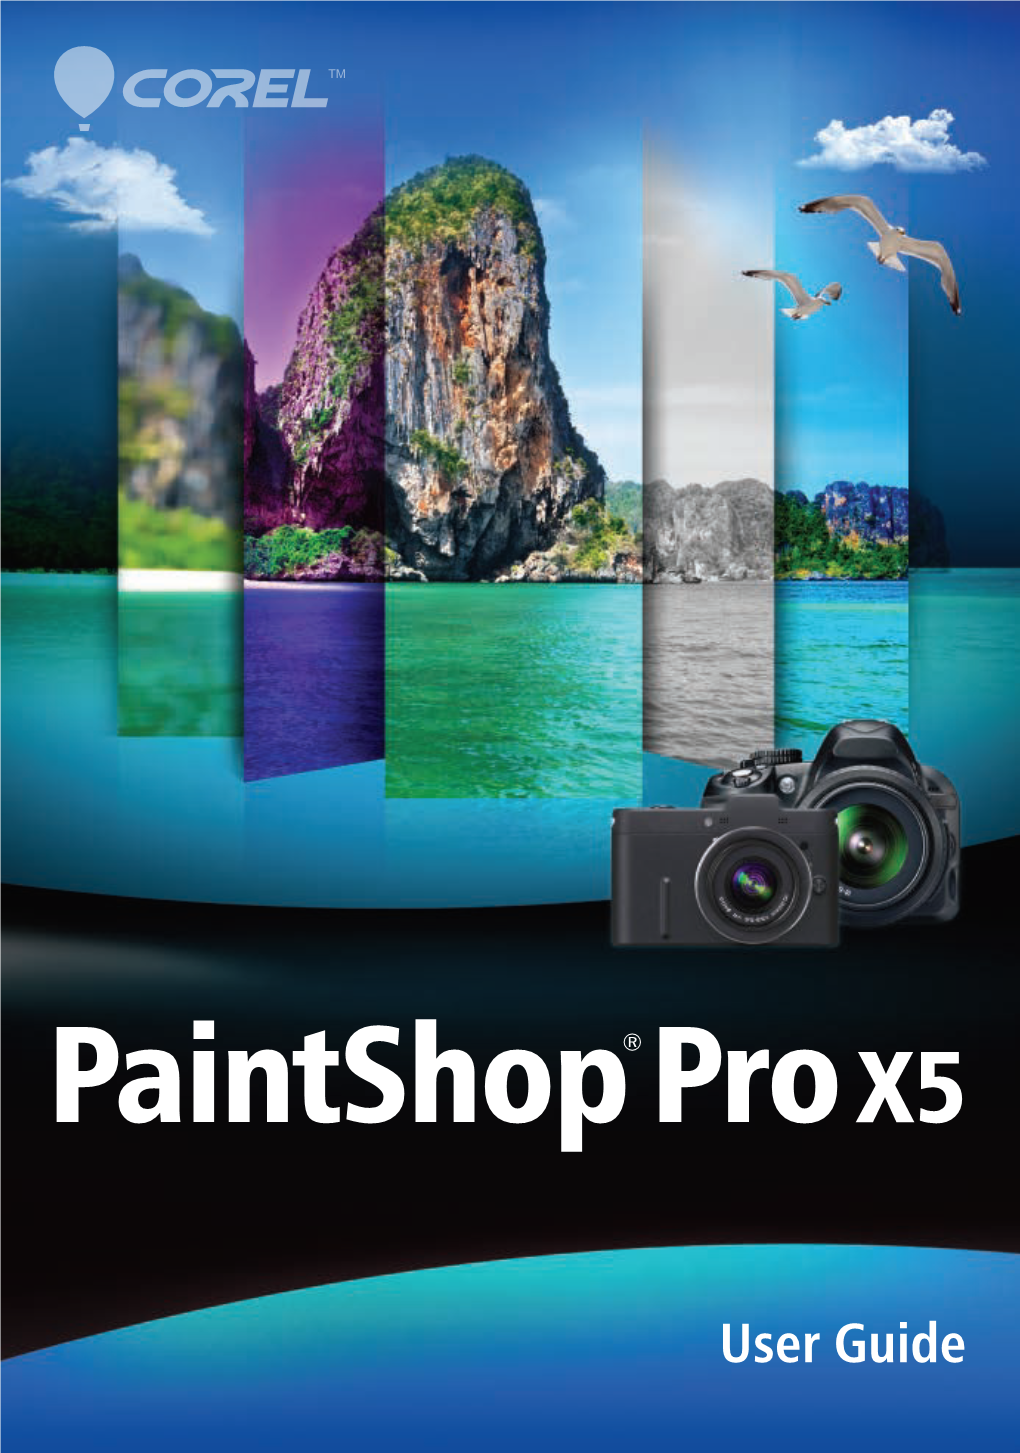 Paintshop Pro X5 User Guide Adjusting Brightness, Contrast, and Clarity